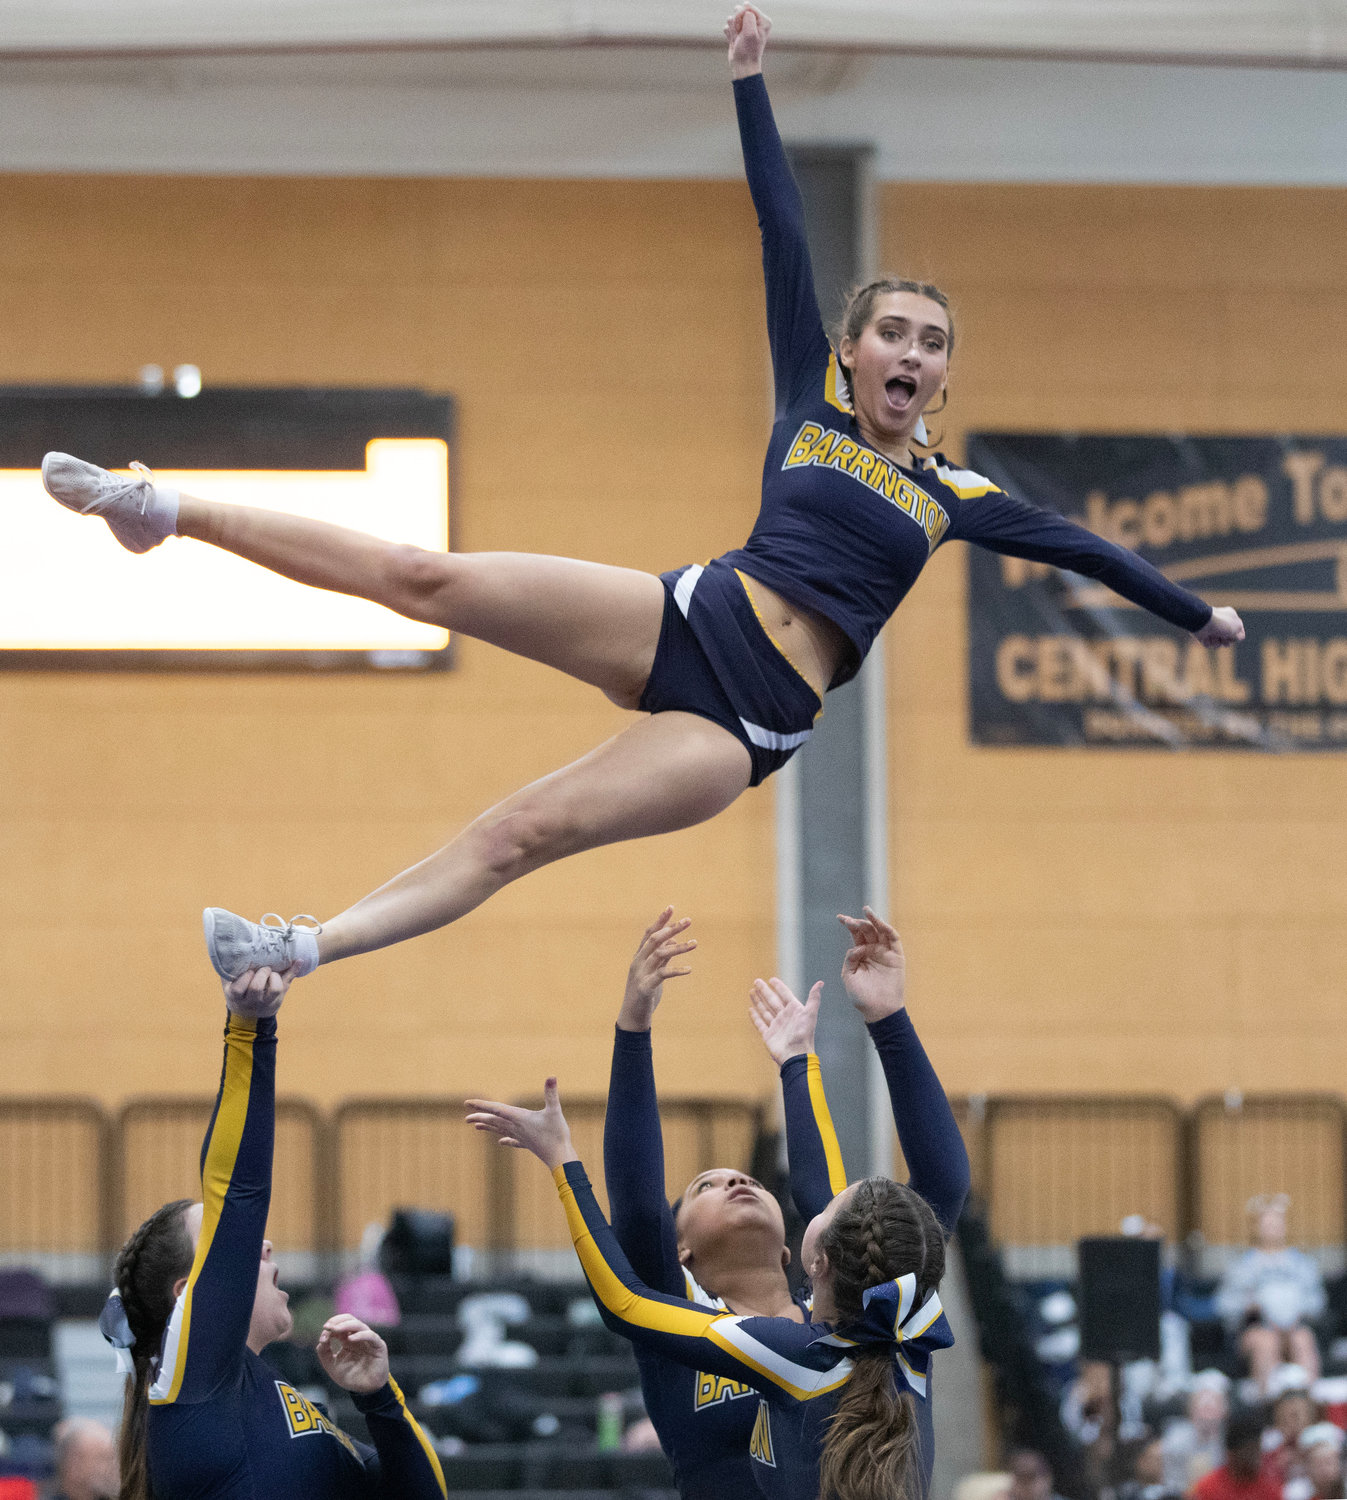 Teammates throw Kaleigh Moran into the air during a stunt at the Rhode Island Interscholastic League Division II Cheer Competition.